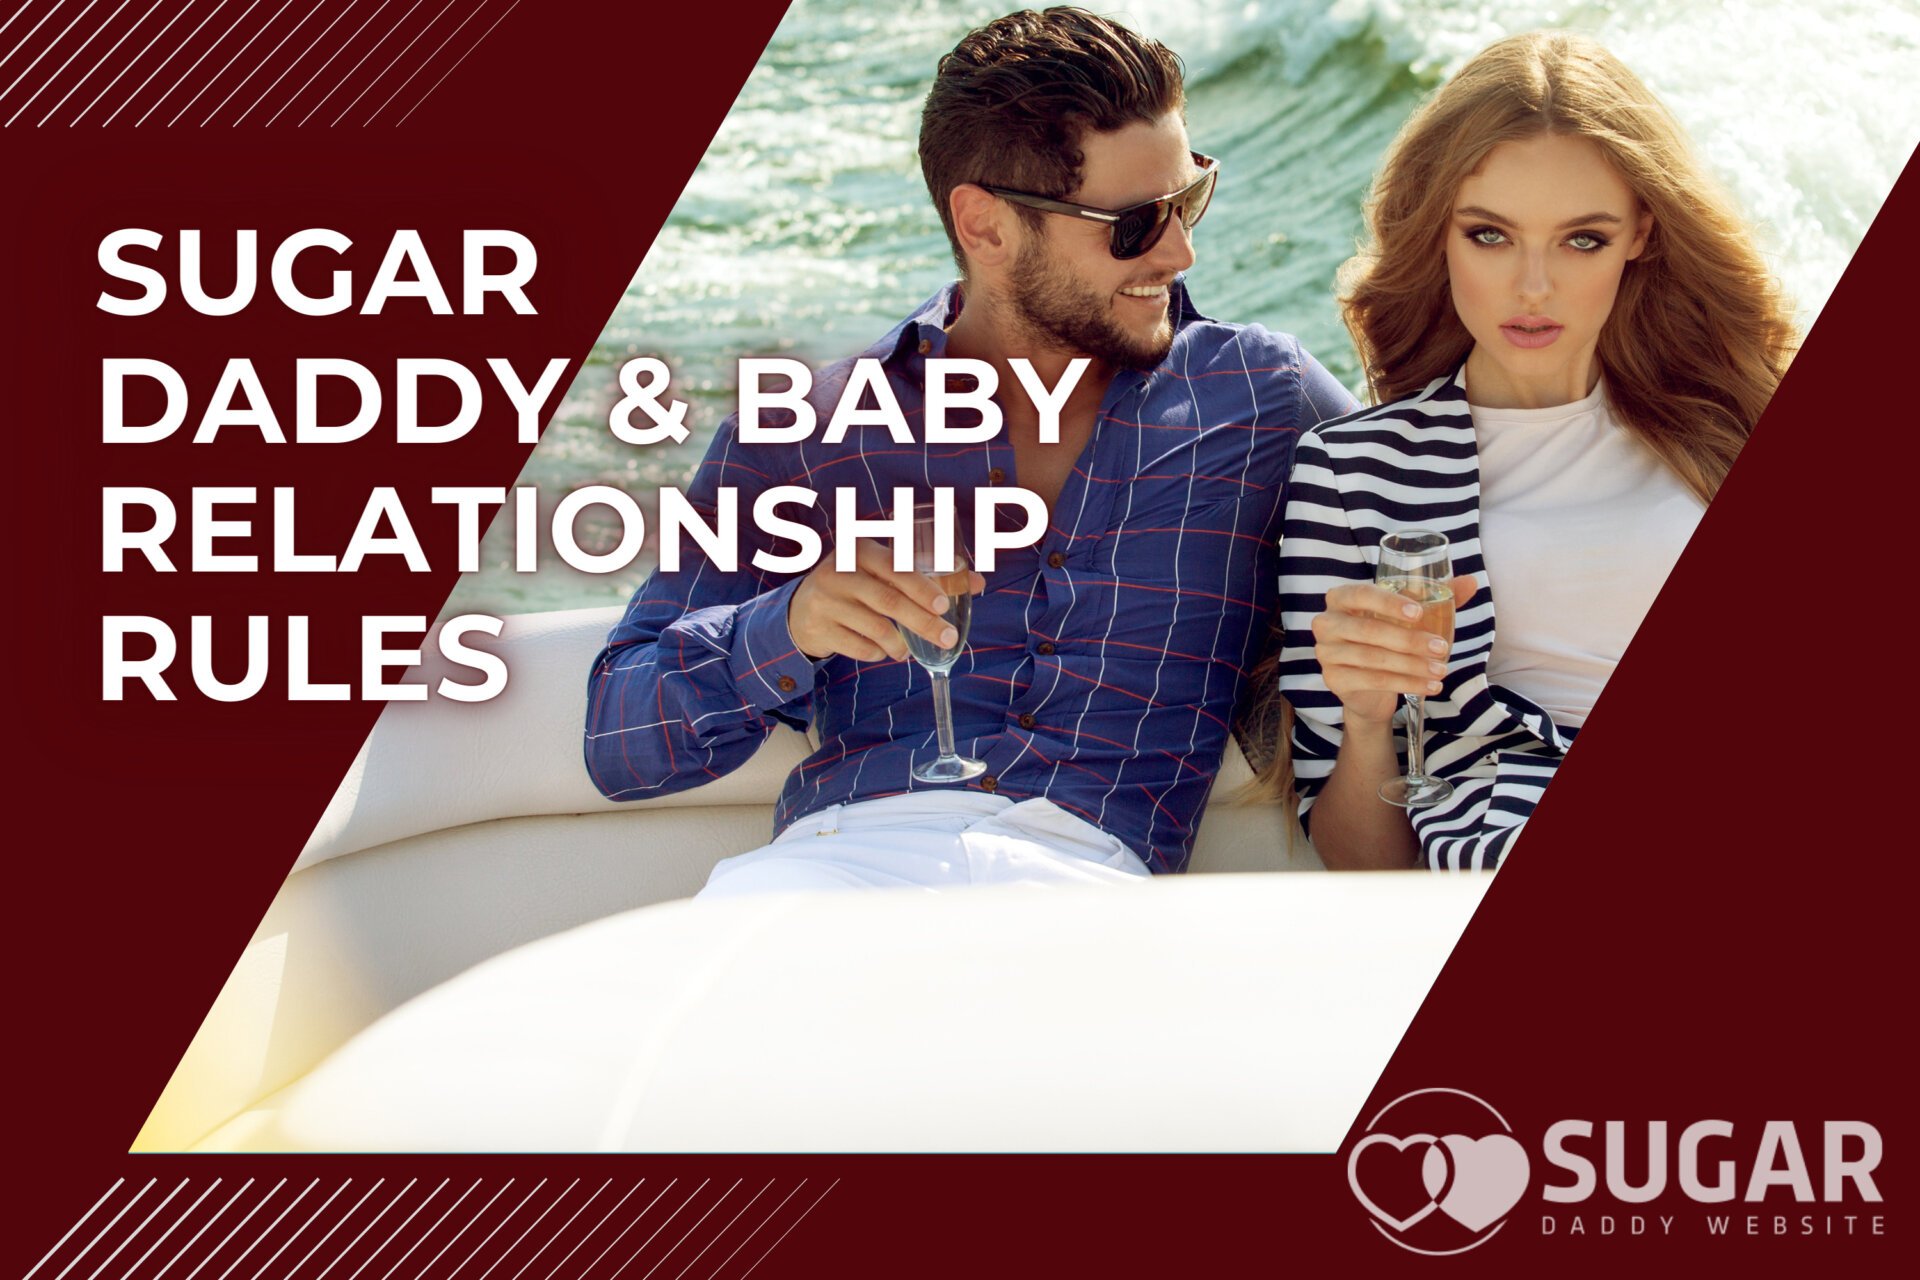 10 Sugar Daddy & Baby Rules of Sugar Relationships Need-To-Know